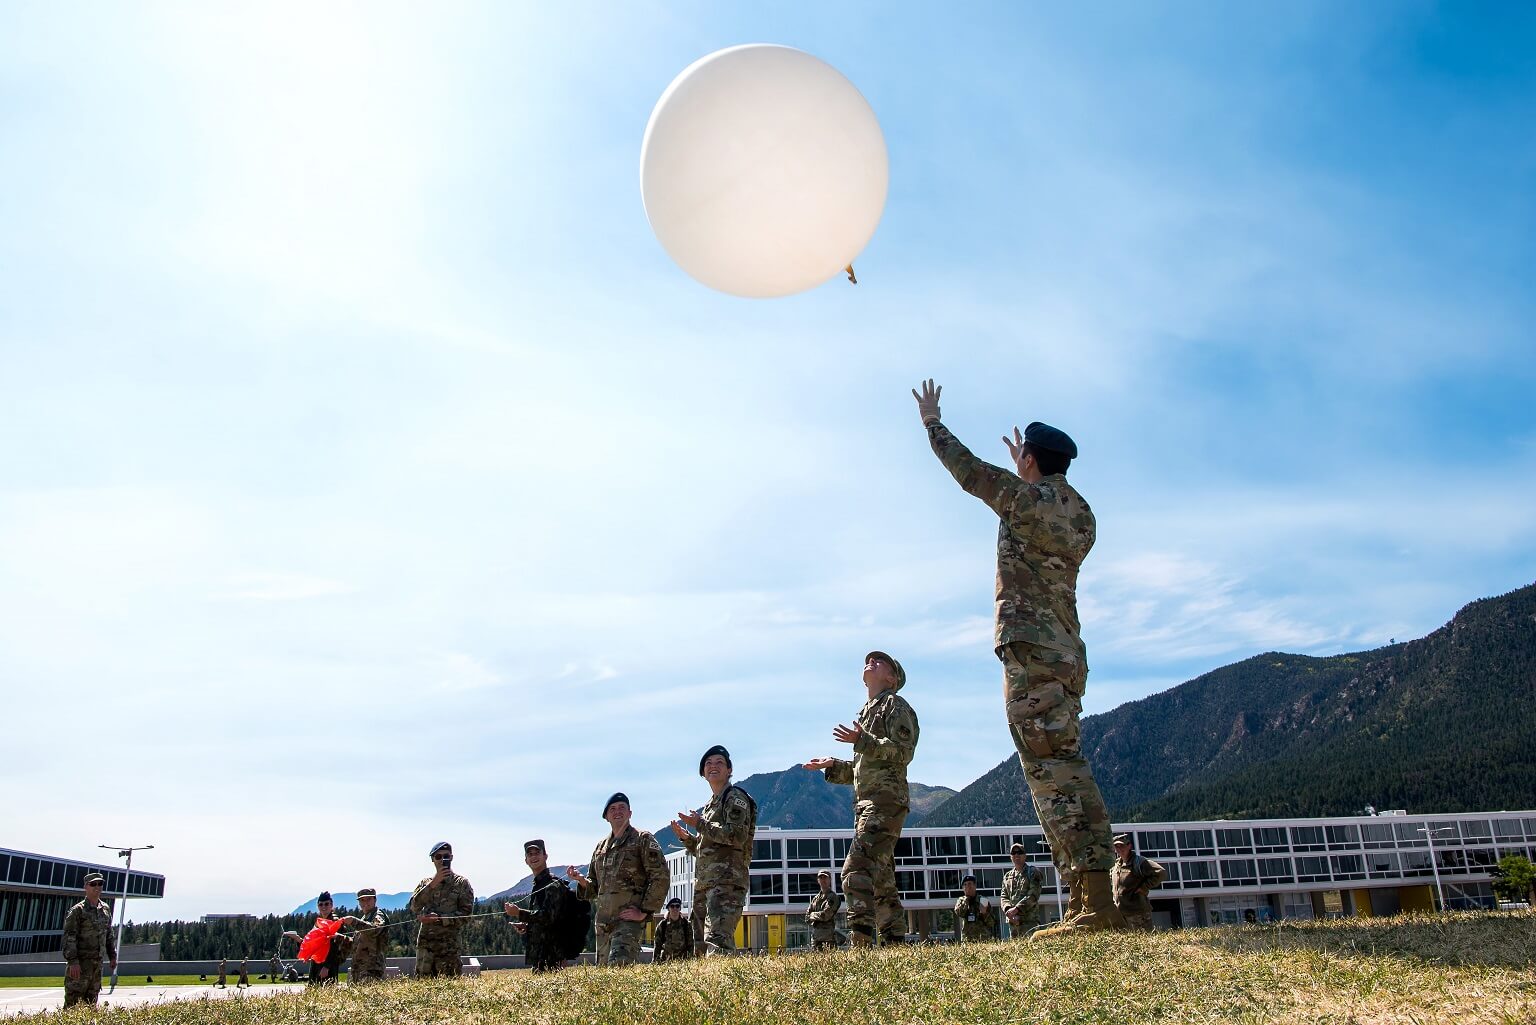 Group of cadets launching weather balloon